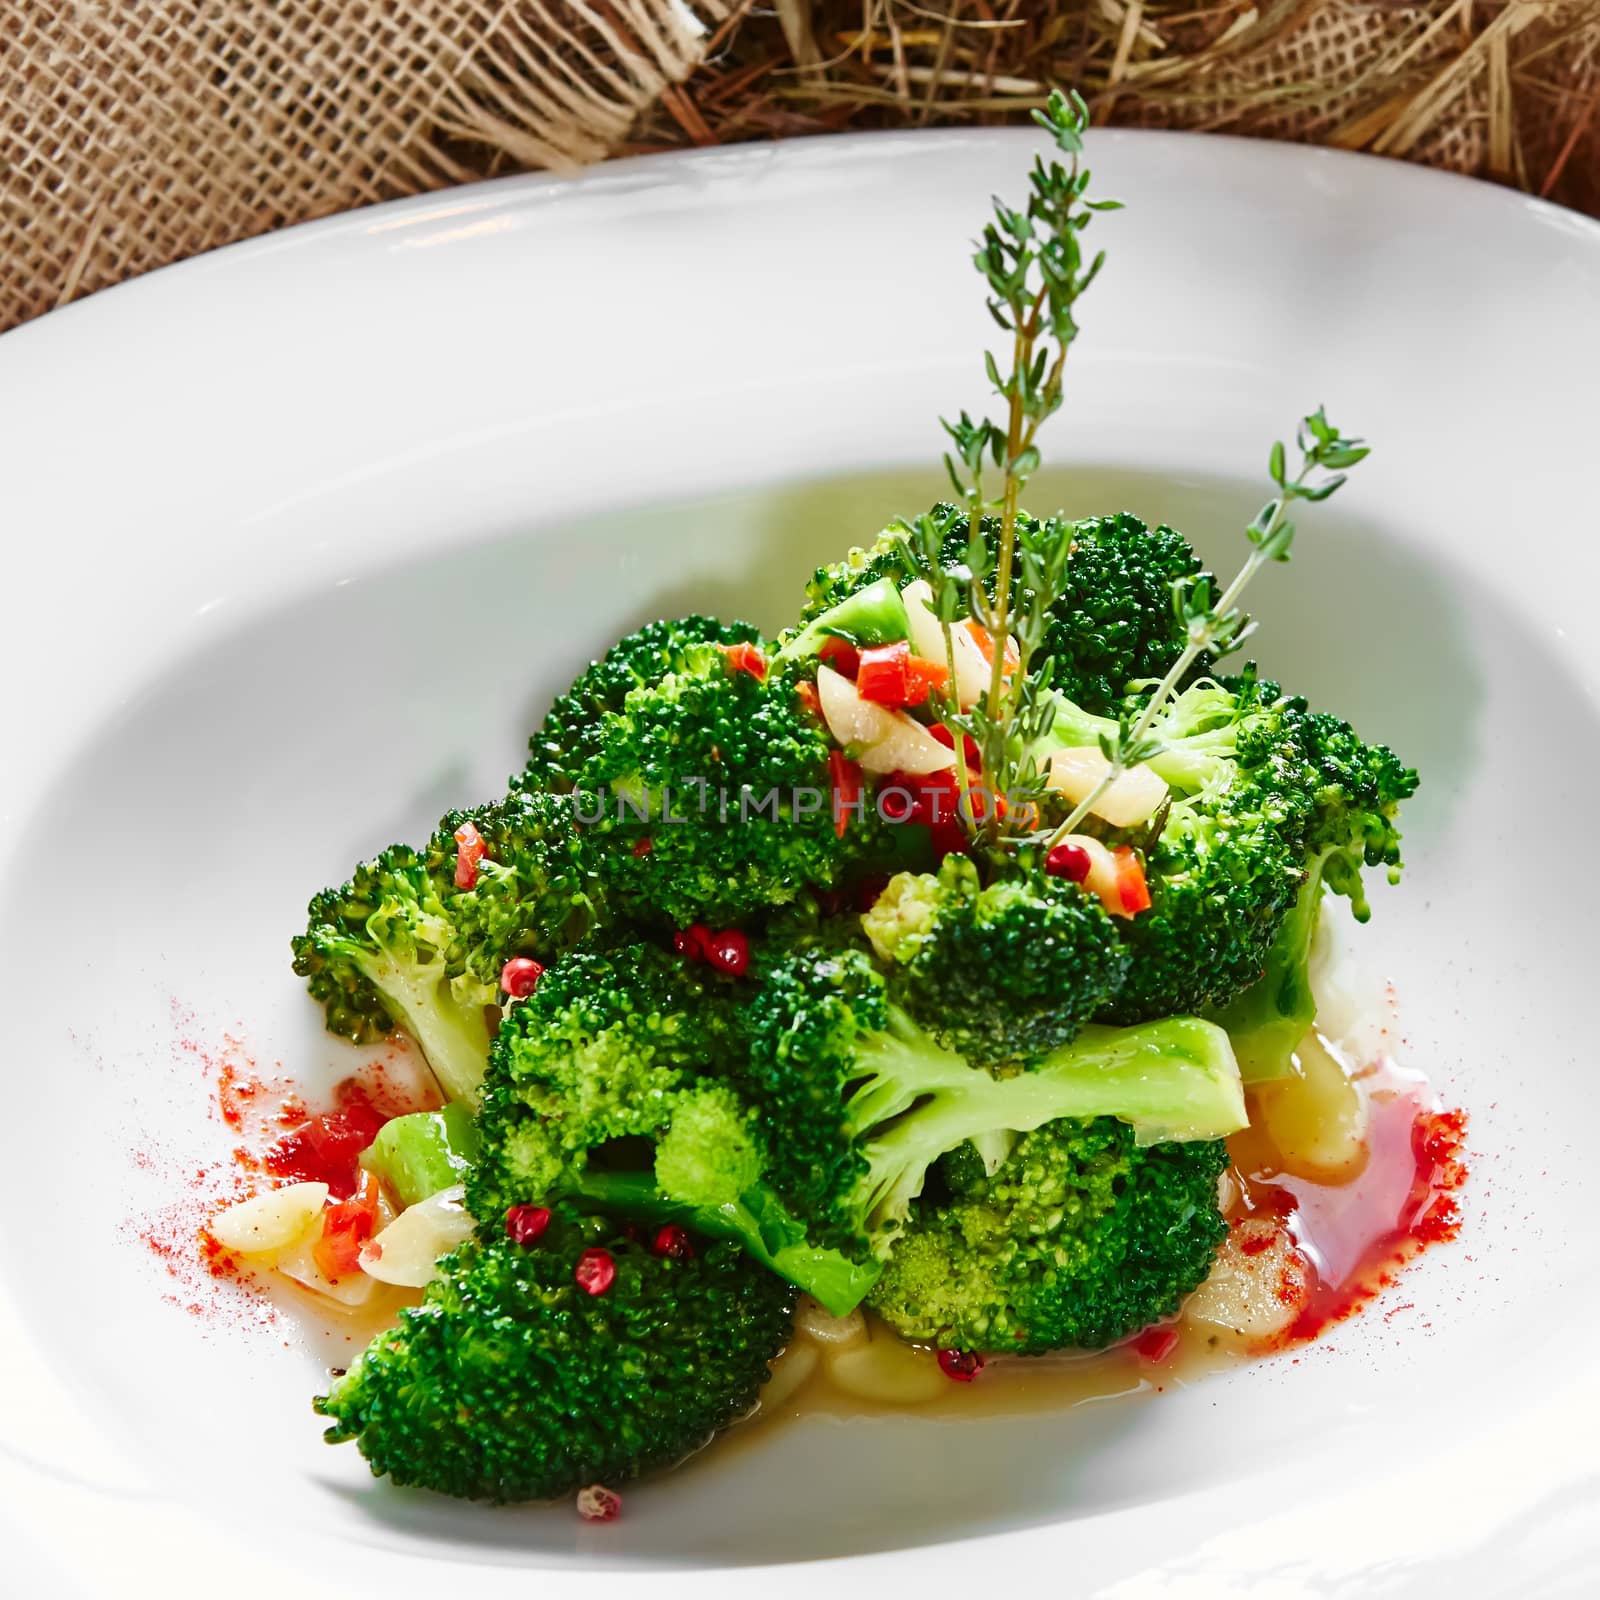 boiled broccoli in white bowl on table